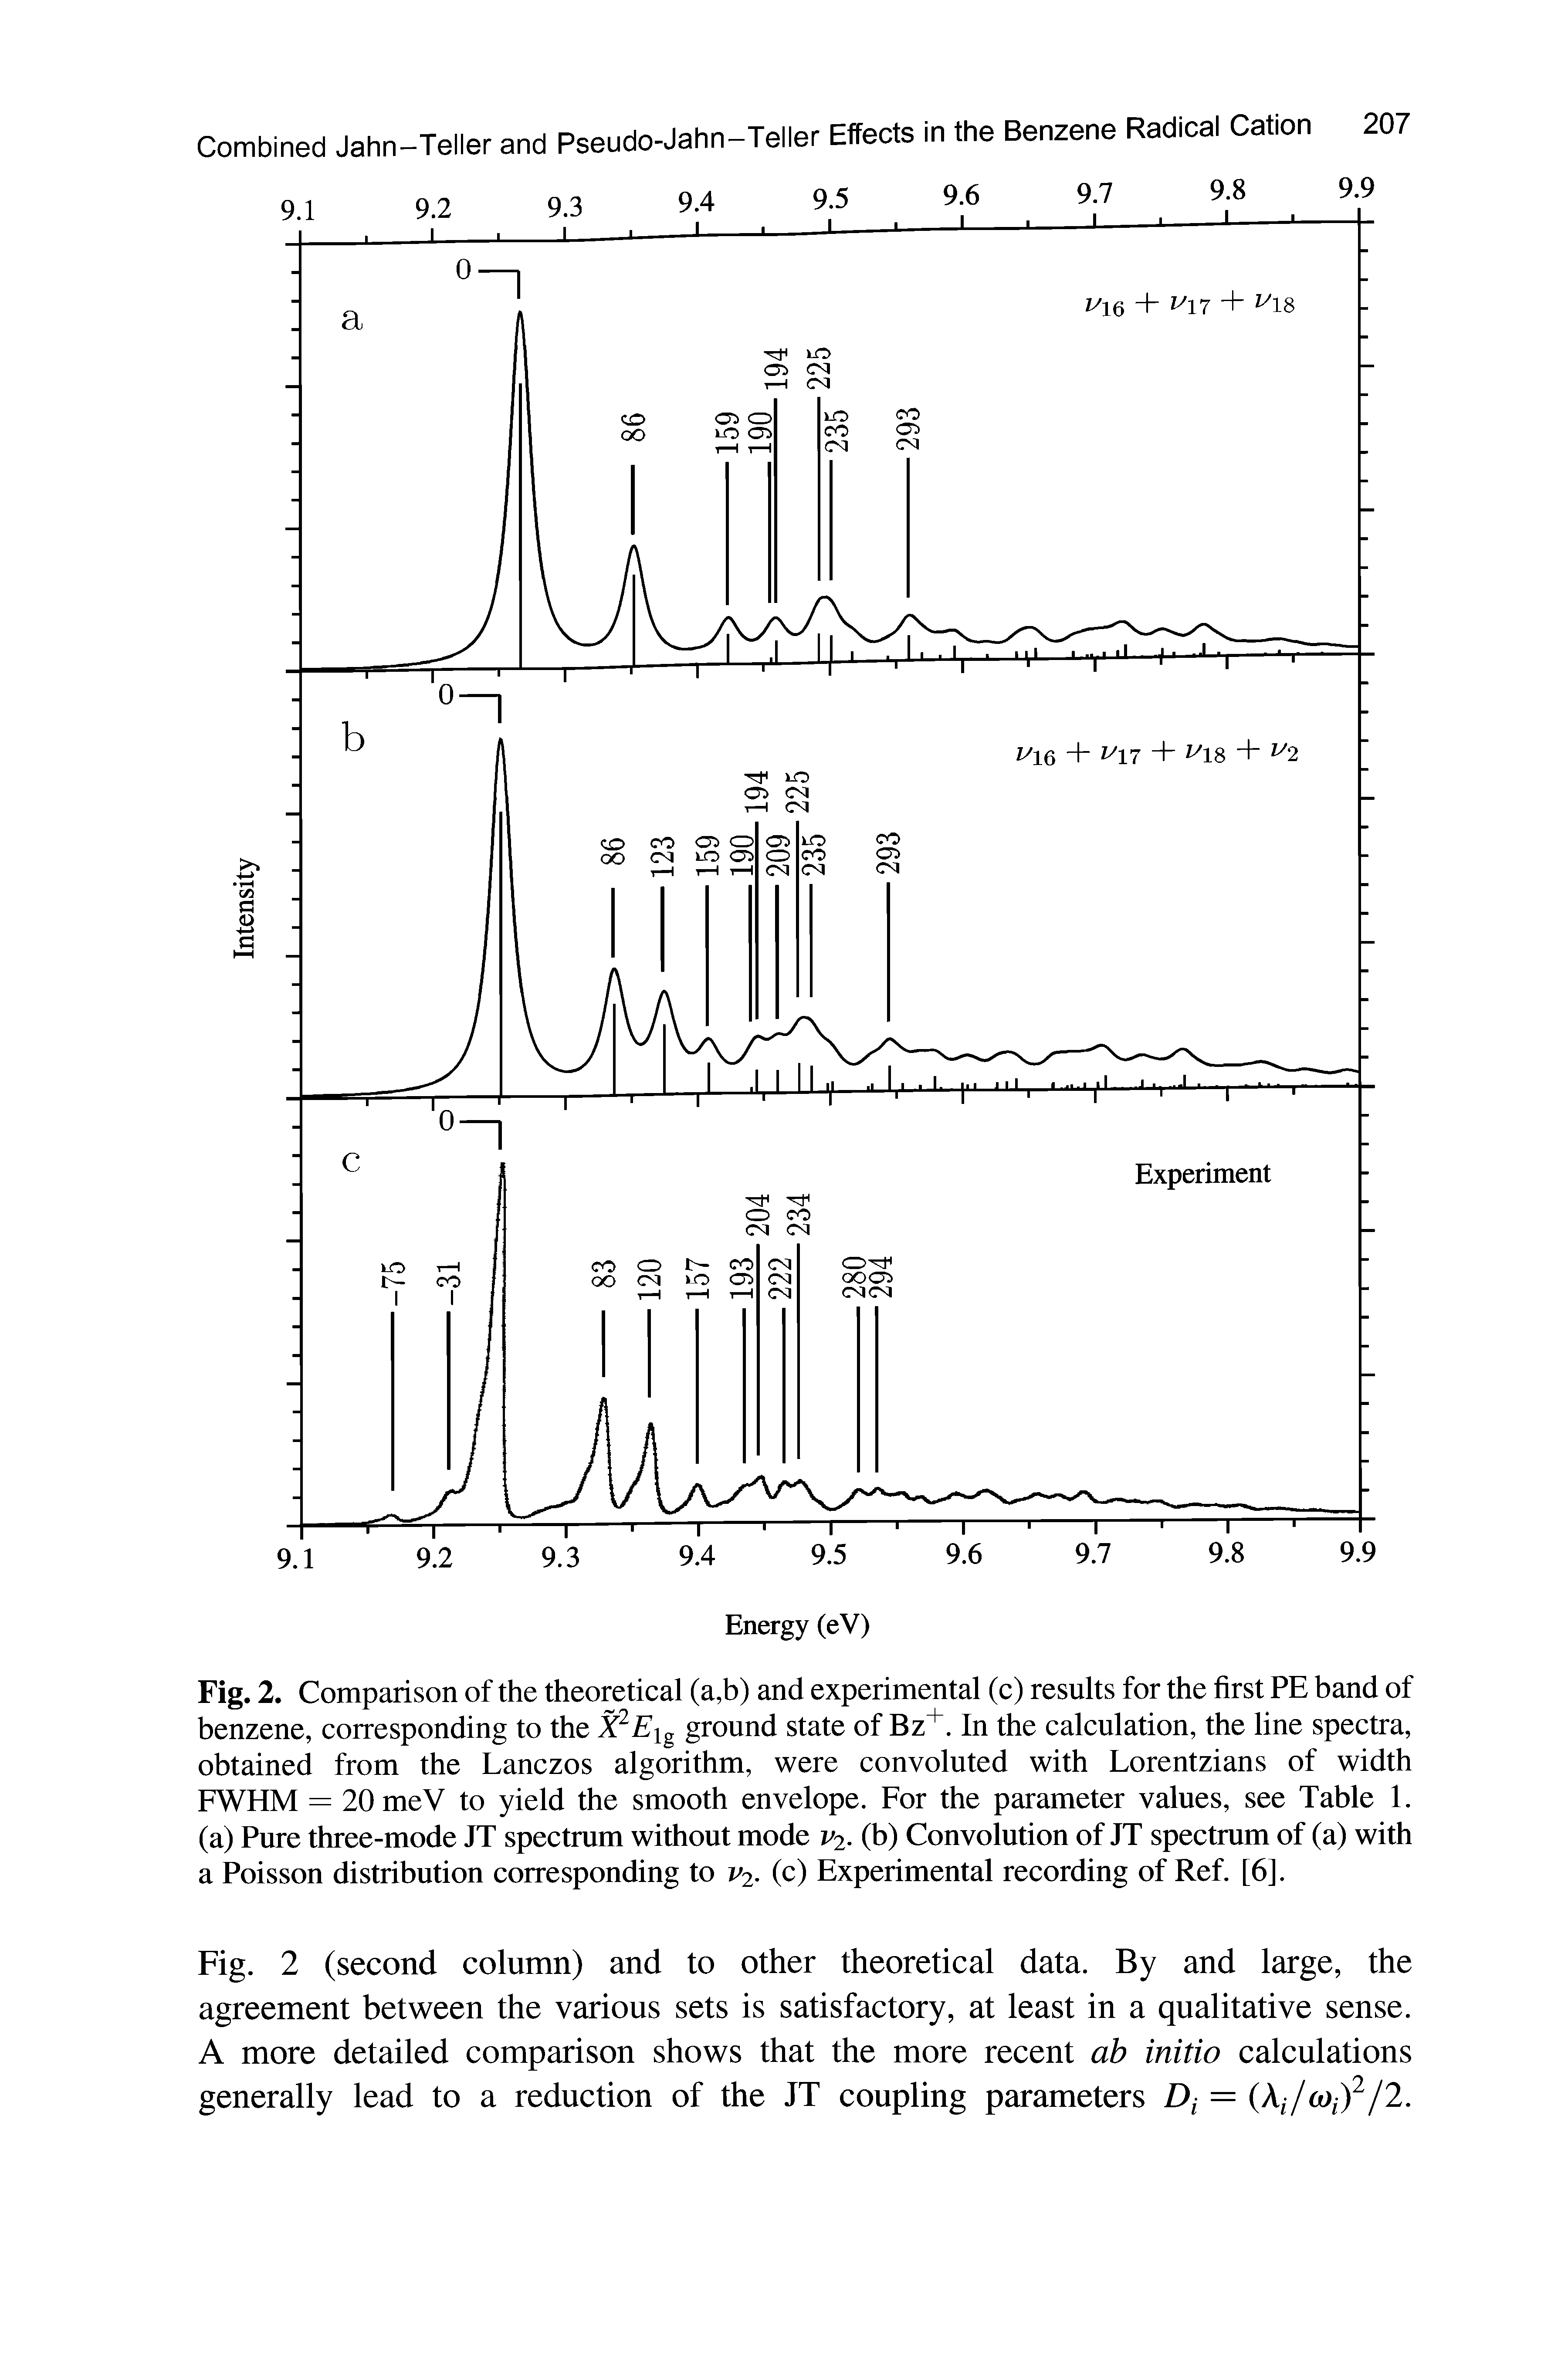 Fig. 2. Comparison of the theoretical (a,b) and experimental (c) results for the first PE band of benzene, corresponding to the X2Eig ground state of Bz+. In the calculation, the line spectra, obtained from the Lanczos algorithm, were convoluted with Lorentzians of width FWHM = 20meV to yield the smooth envelope. For the parameter values, see Table 1. (a) Pure three-mode JT spectrum without mode v2. (b) Convolution of JT spectrum of (a) with a Poisson distribution corresponding to v2. (c) Experimental recording of Ref. [6].